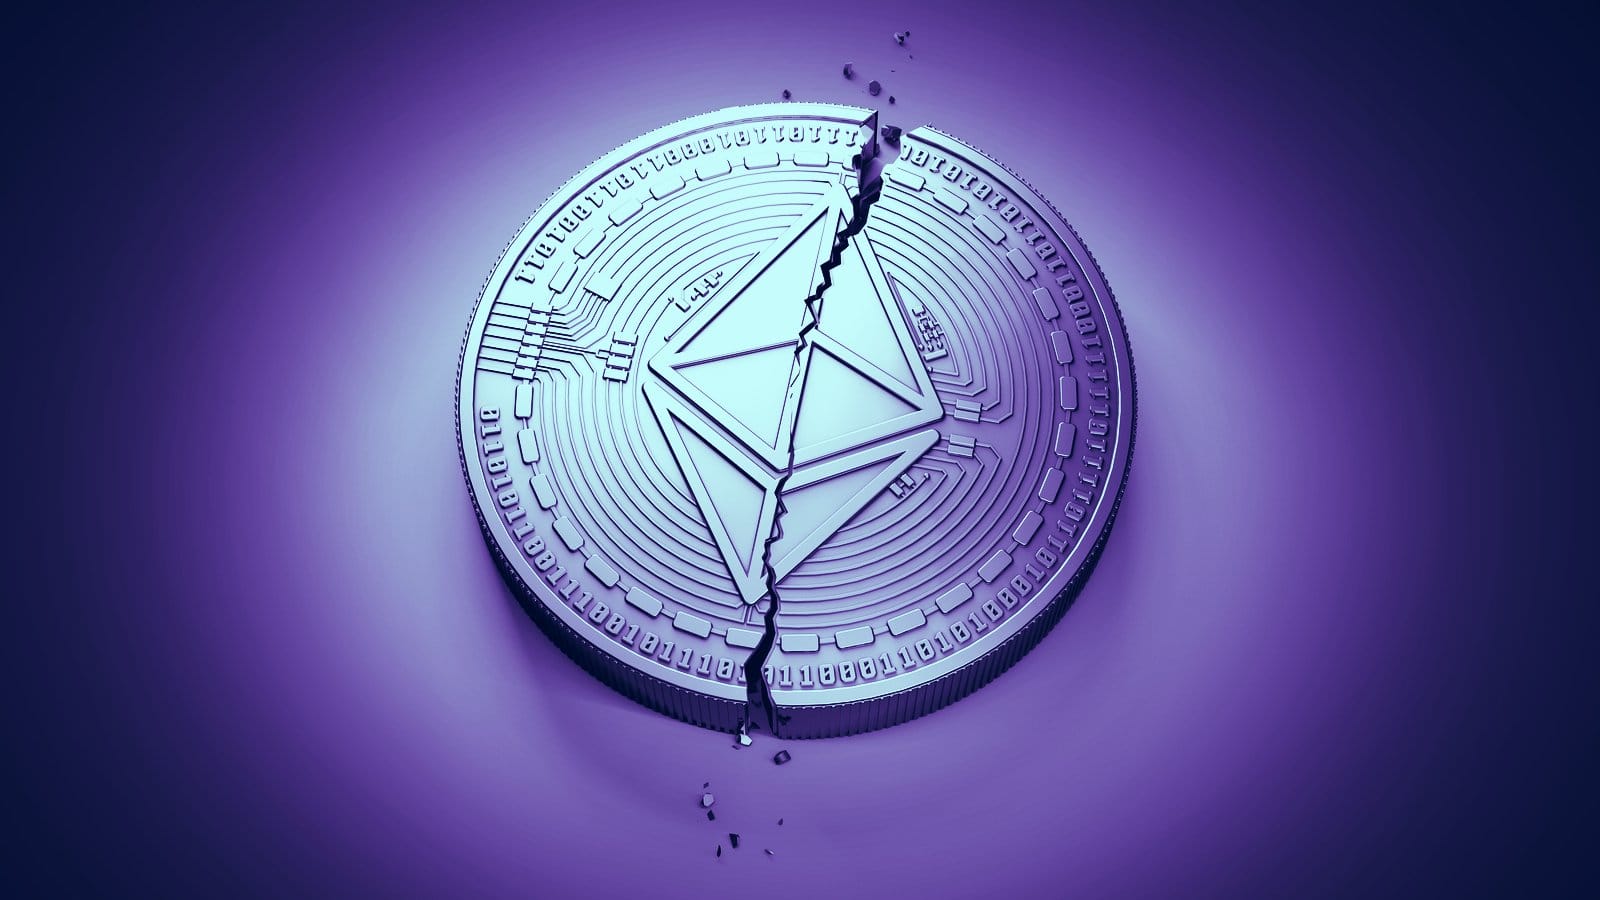 Ethereum: a bug on the blockchain causes it to split in two